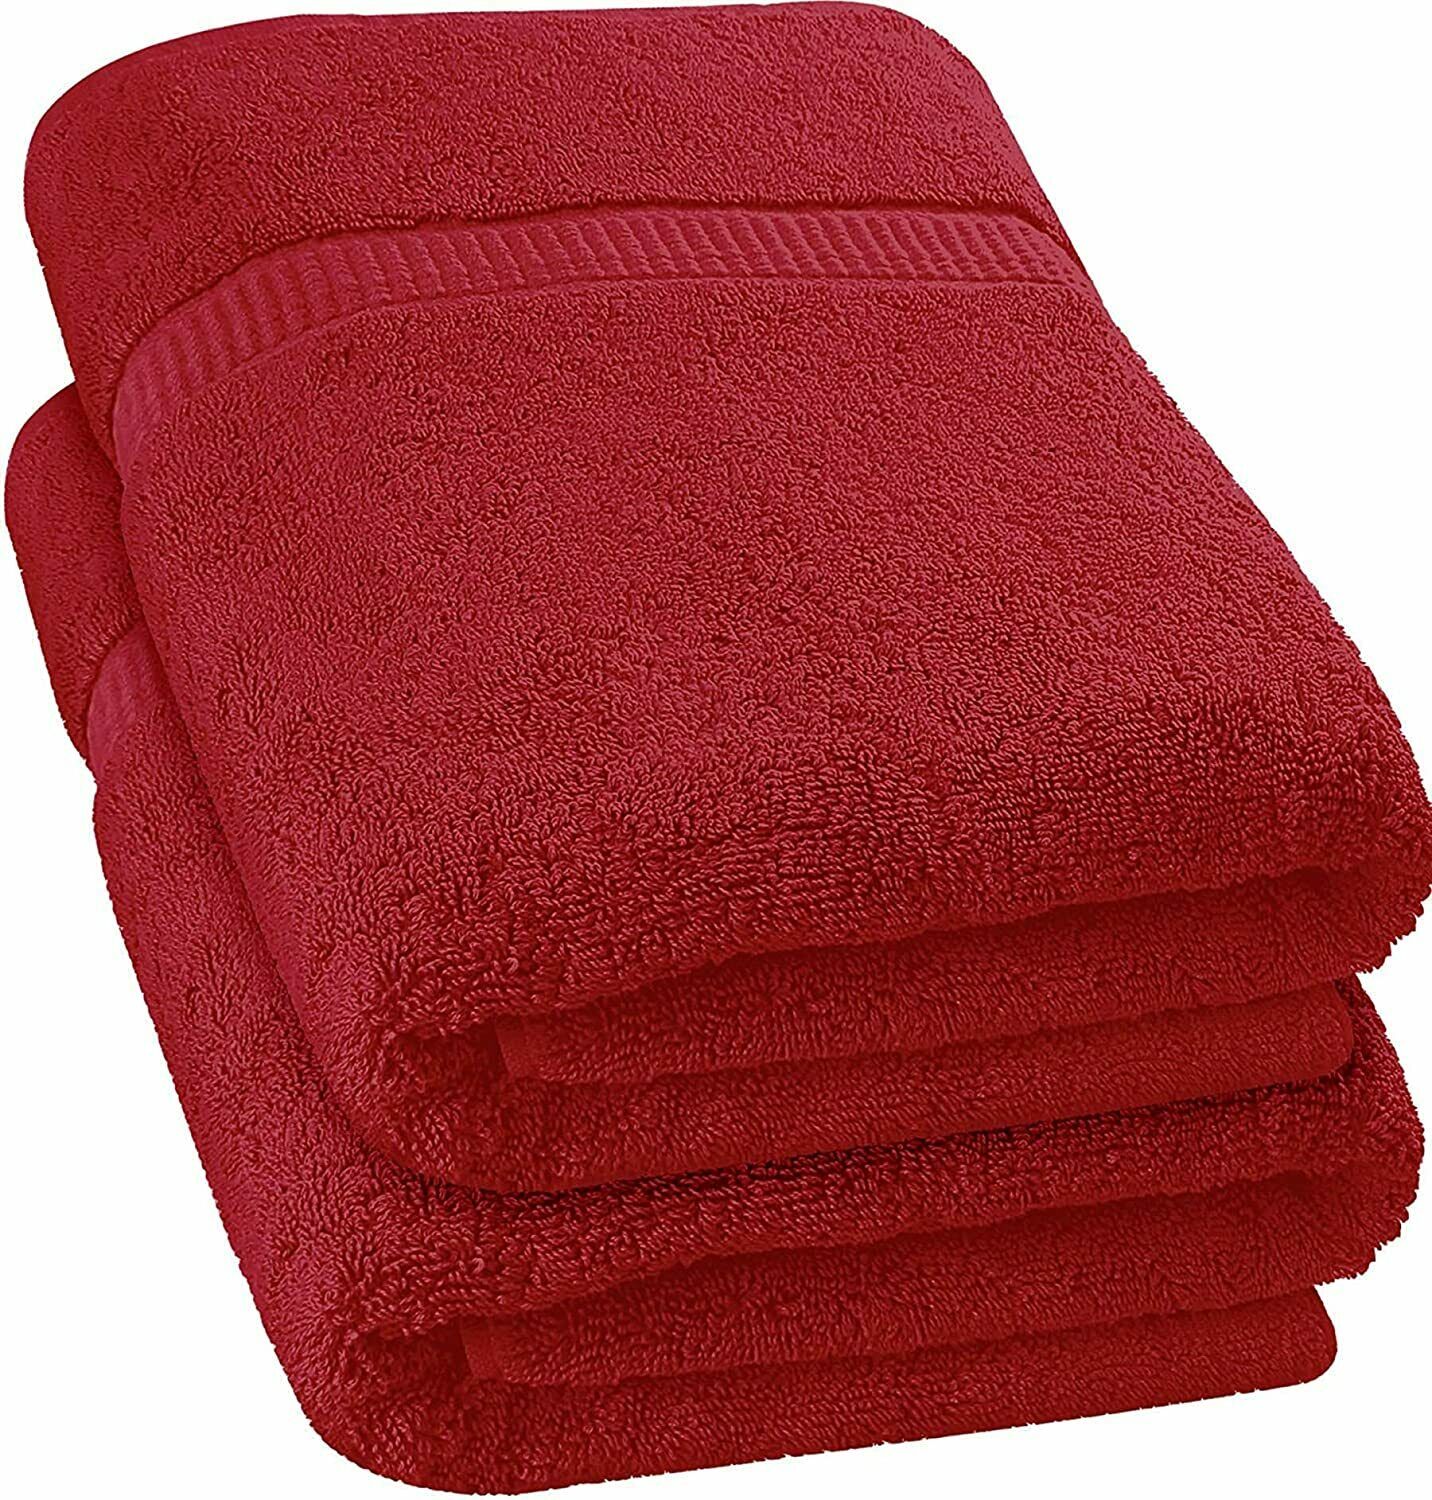 2 Pack Luxurious Jumbo Bath Sheet Soft Absorbent Cotton 35 X 70 In Utopia Towels